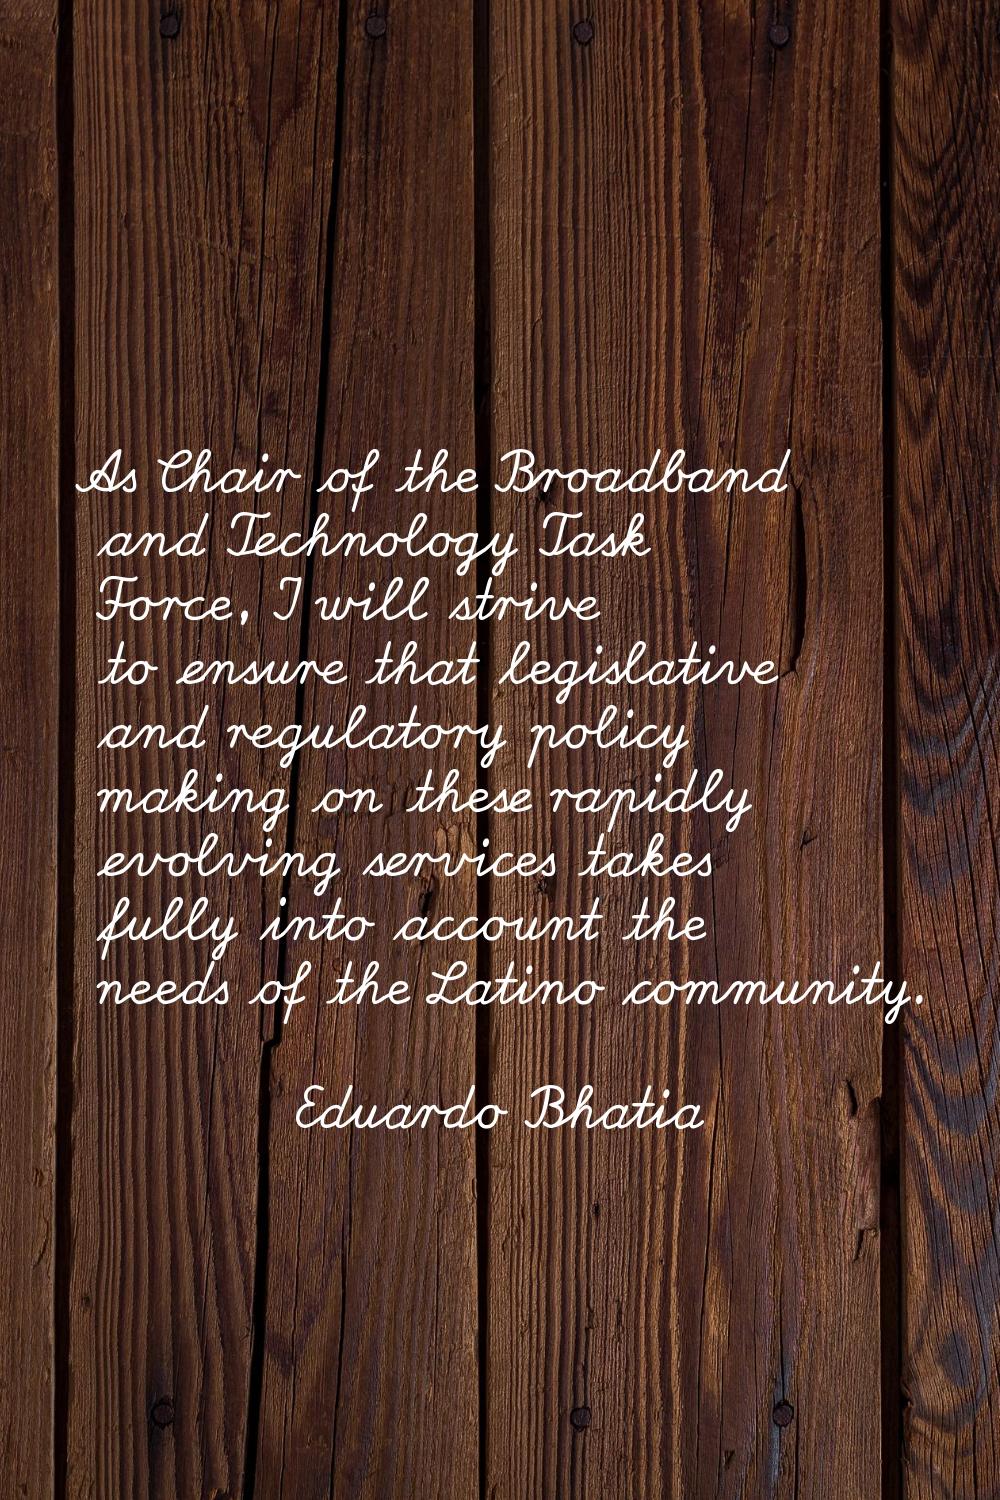 As Chair of the Broadband and Technology Task Force, I will strive to ensure that legislative and r